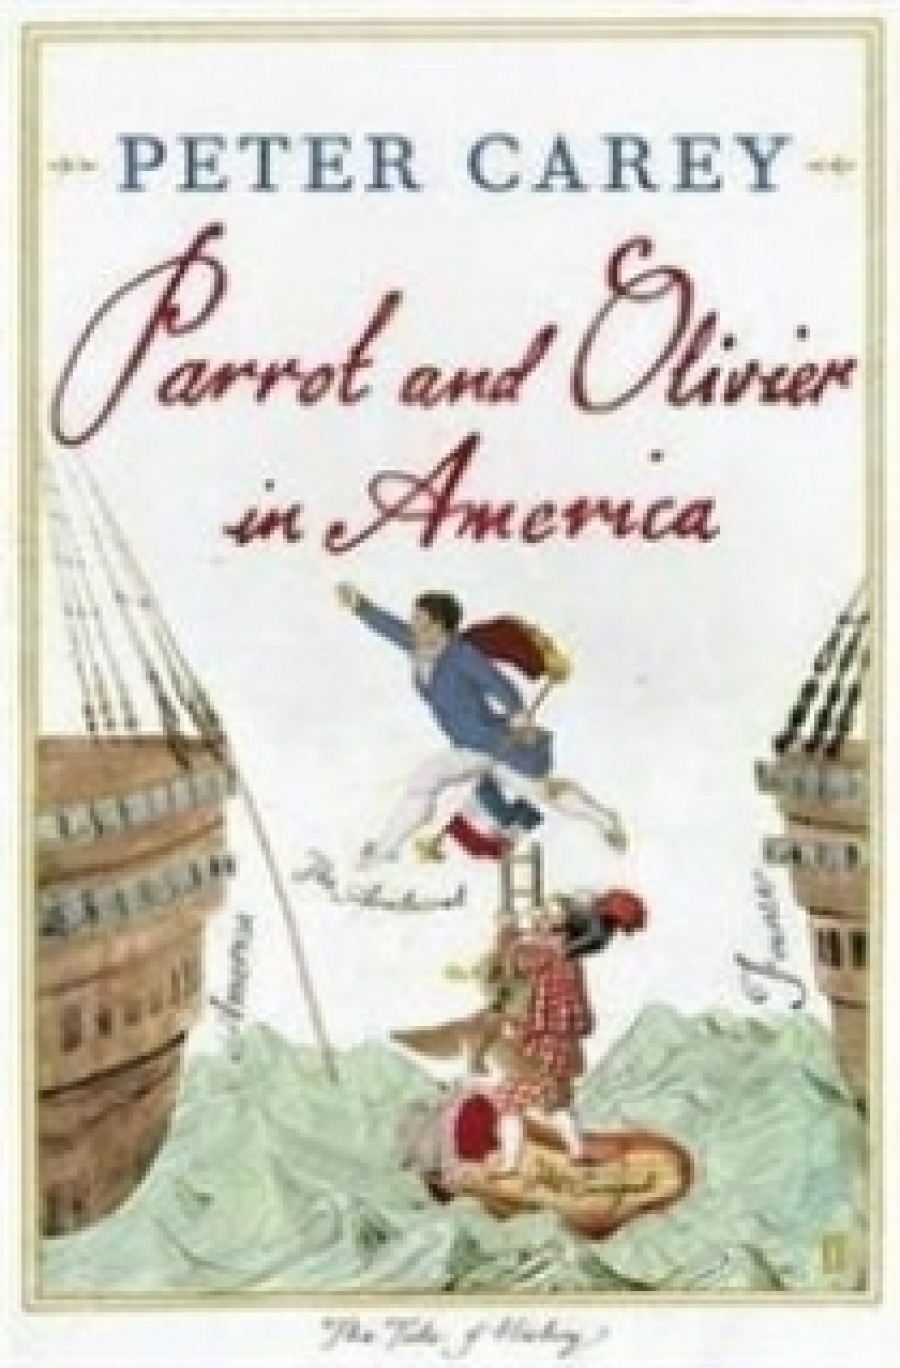 Peter C. Parrot and Olivier in America 